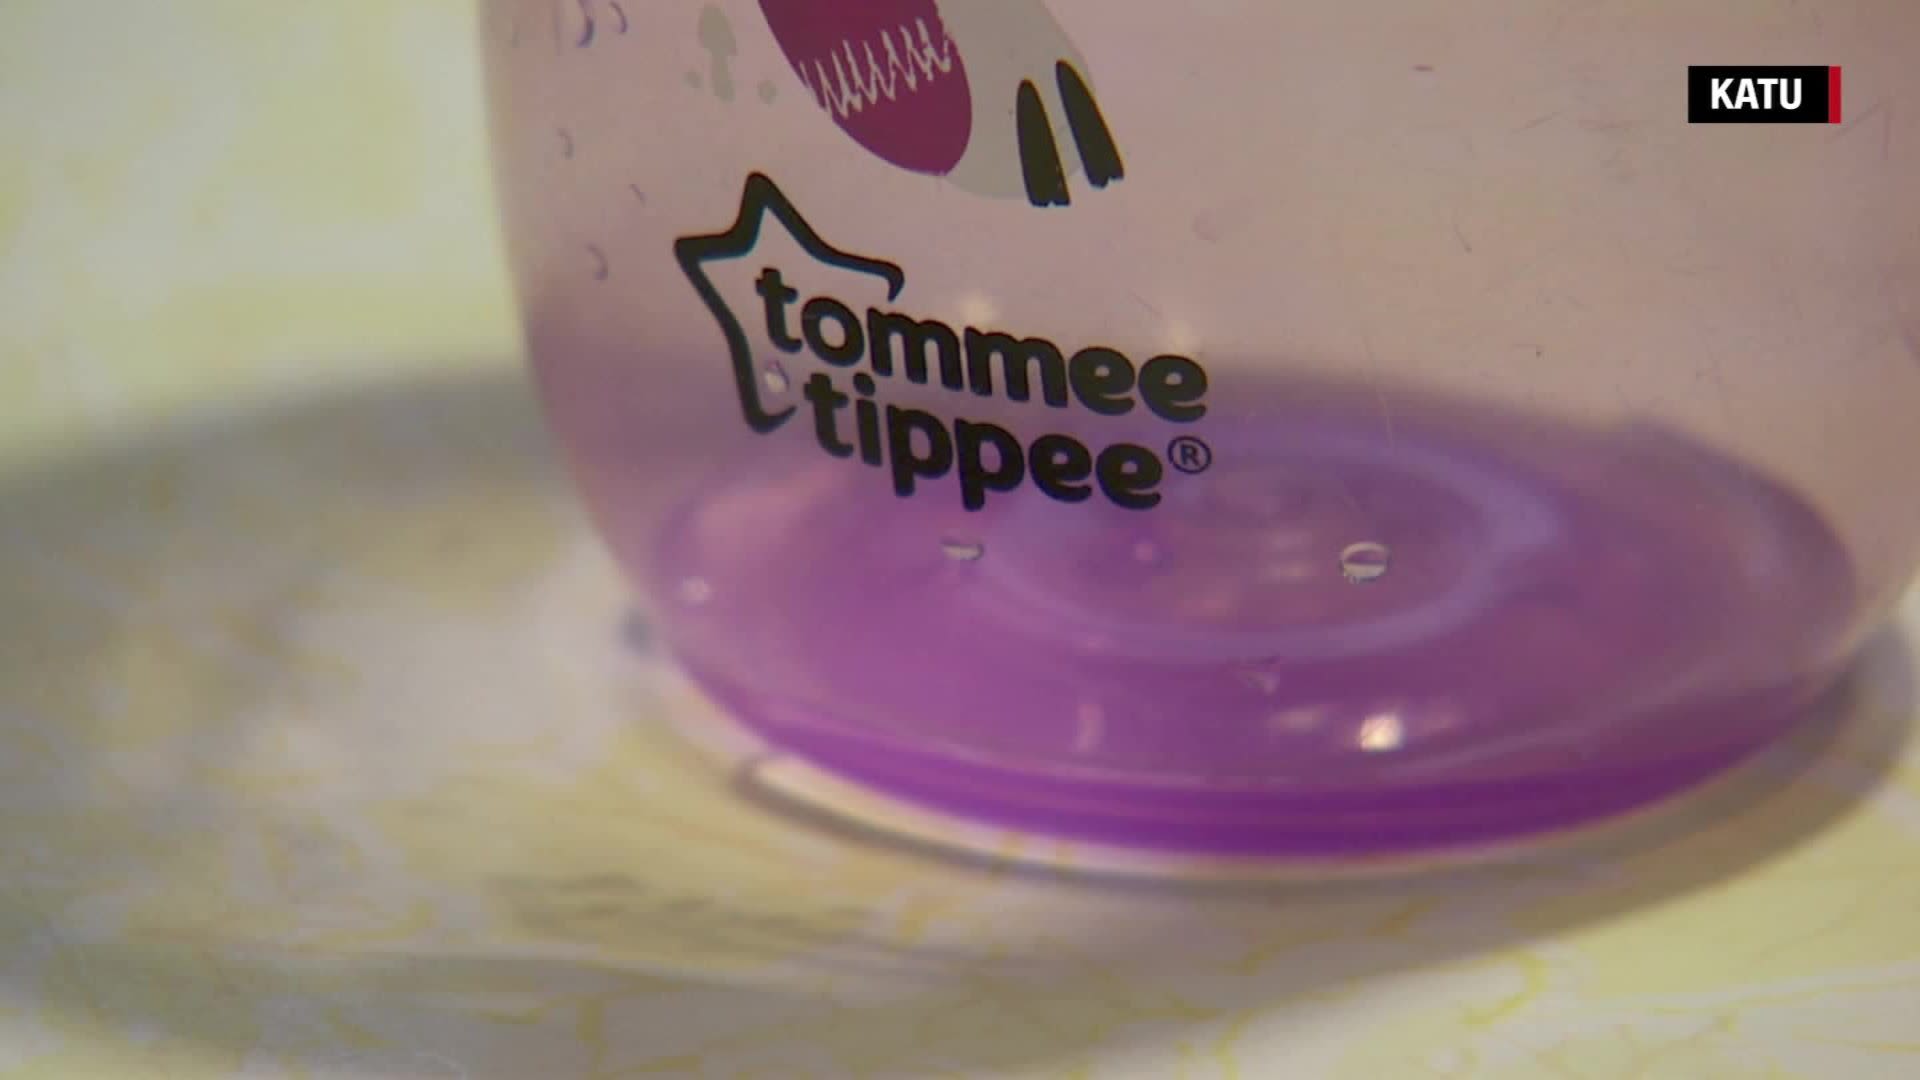 Tommee Tippee Sippy manufacturer recalls 3m children cups over